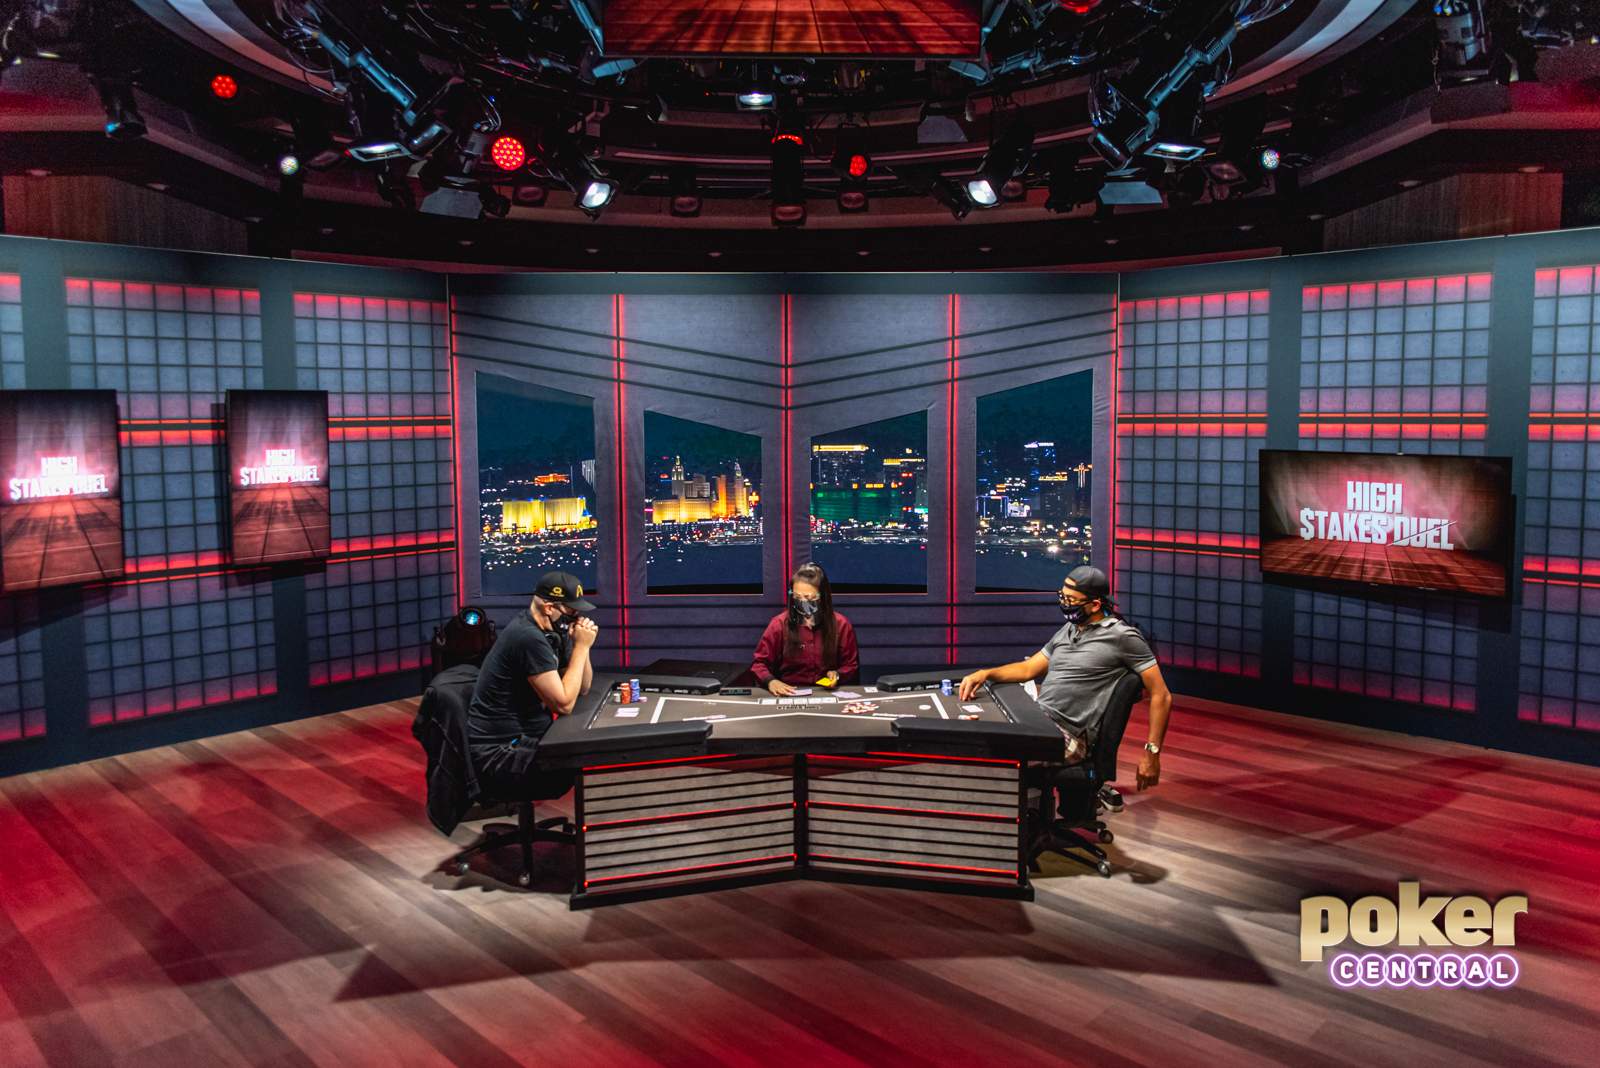 Phil Hellmuth Wins Round 1 of High Stakes Duel